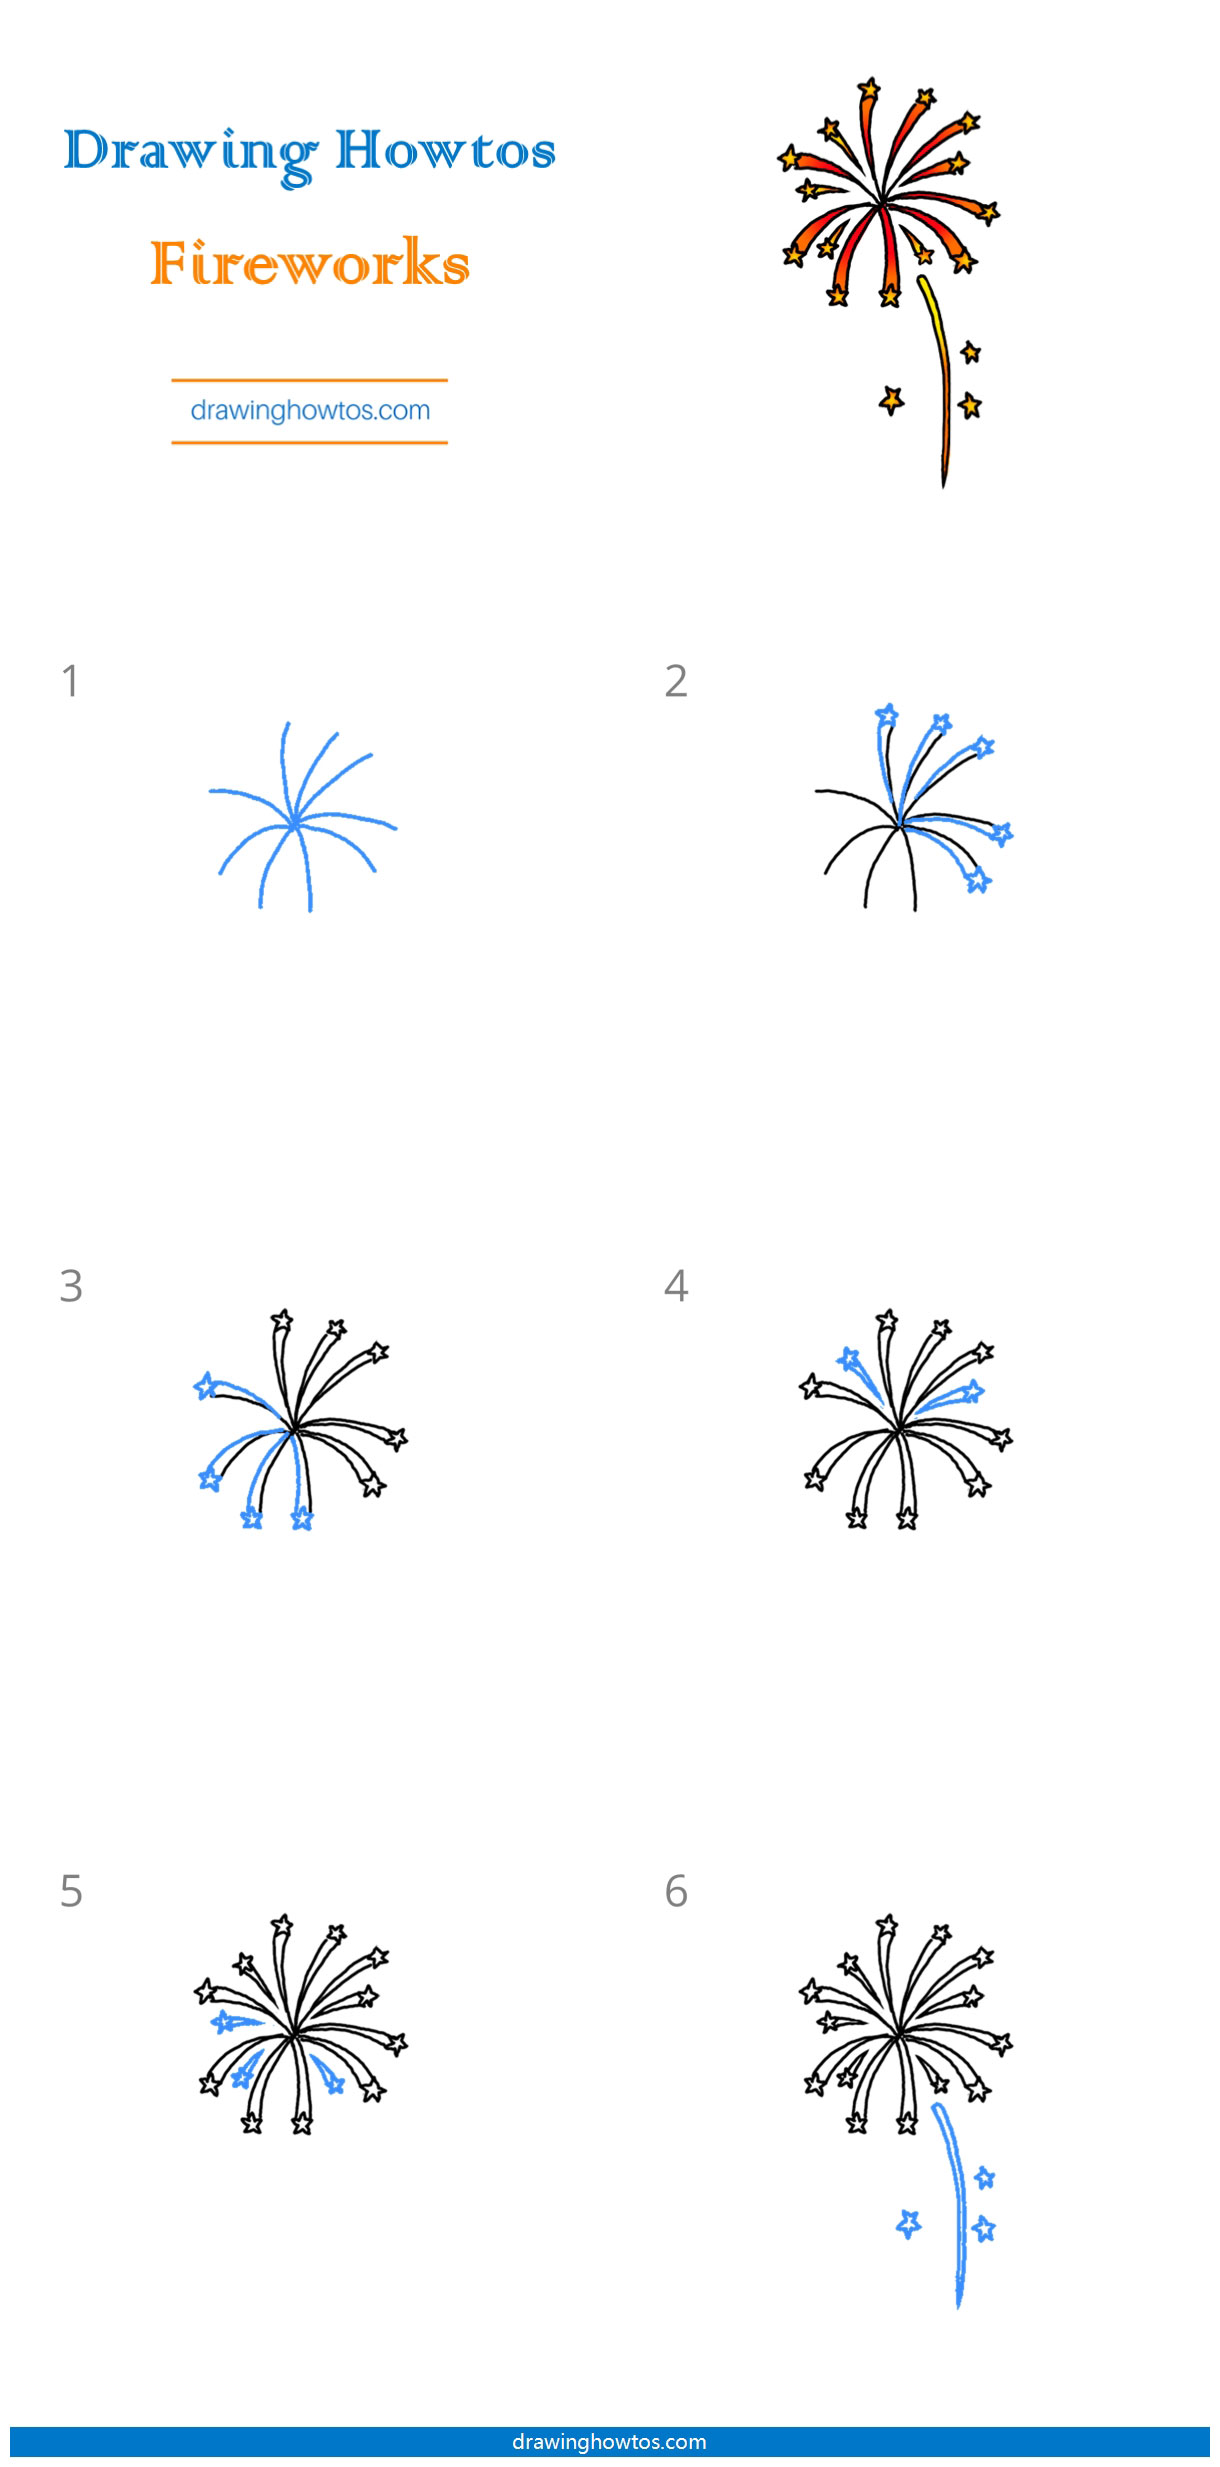 How to Draw Fireworks Step by Step